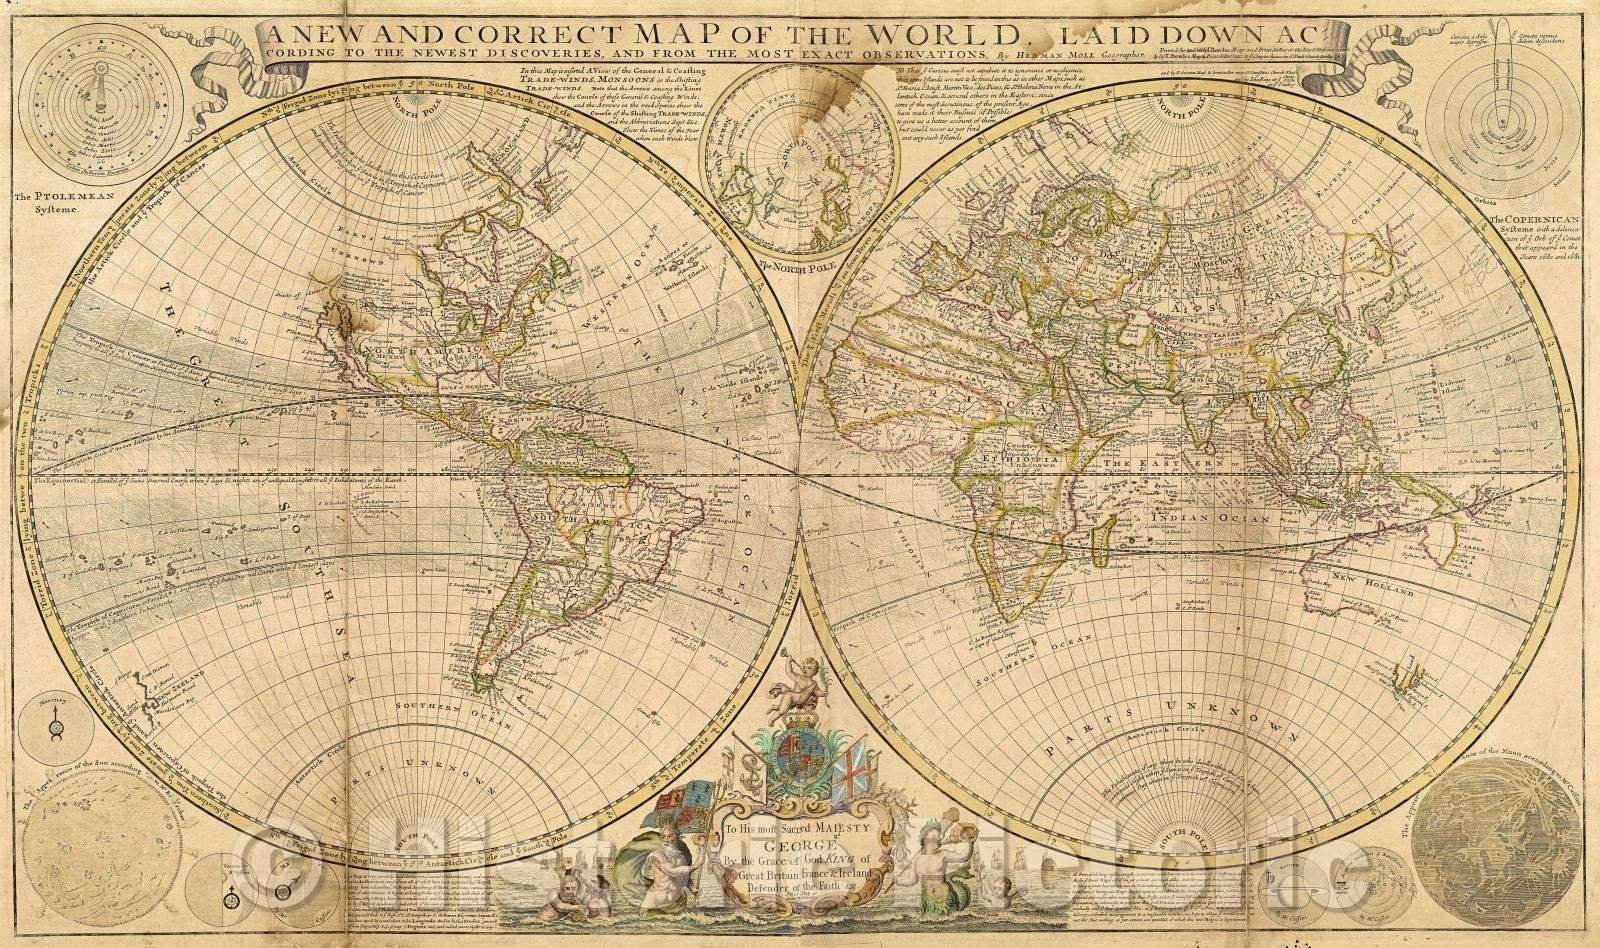 Historic Map : A New and Correct Map of the World laid down according to the newest discoveries, and from the most exact observations by Herman Moll, Geographer, 1709 , Vintage Wall Art